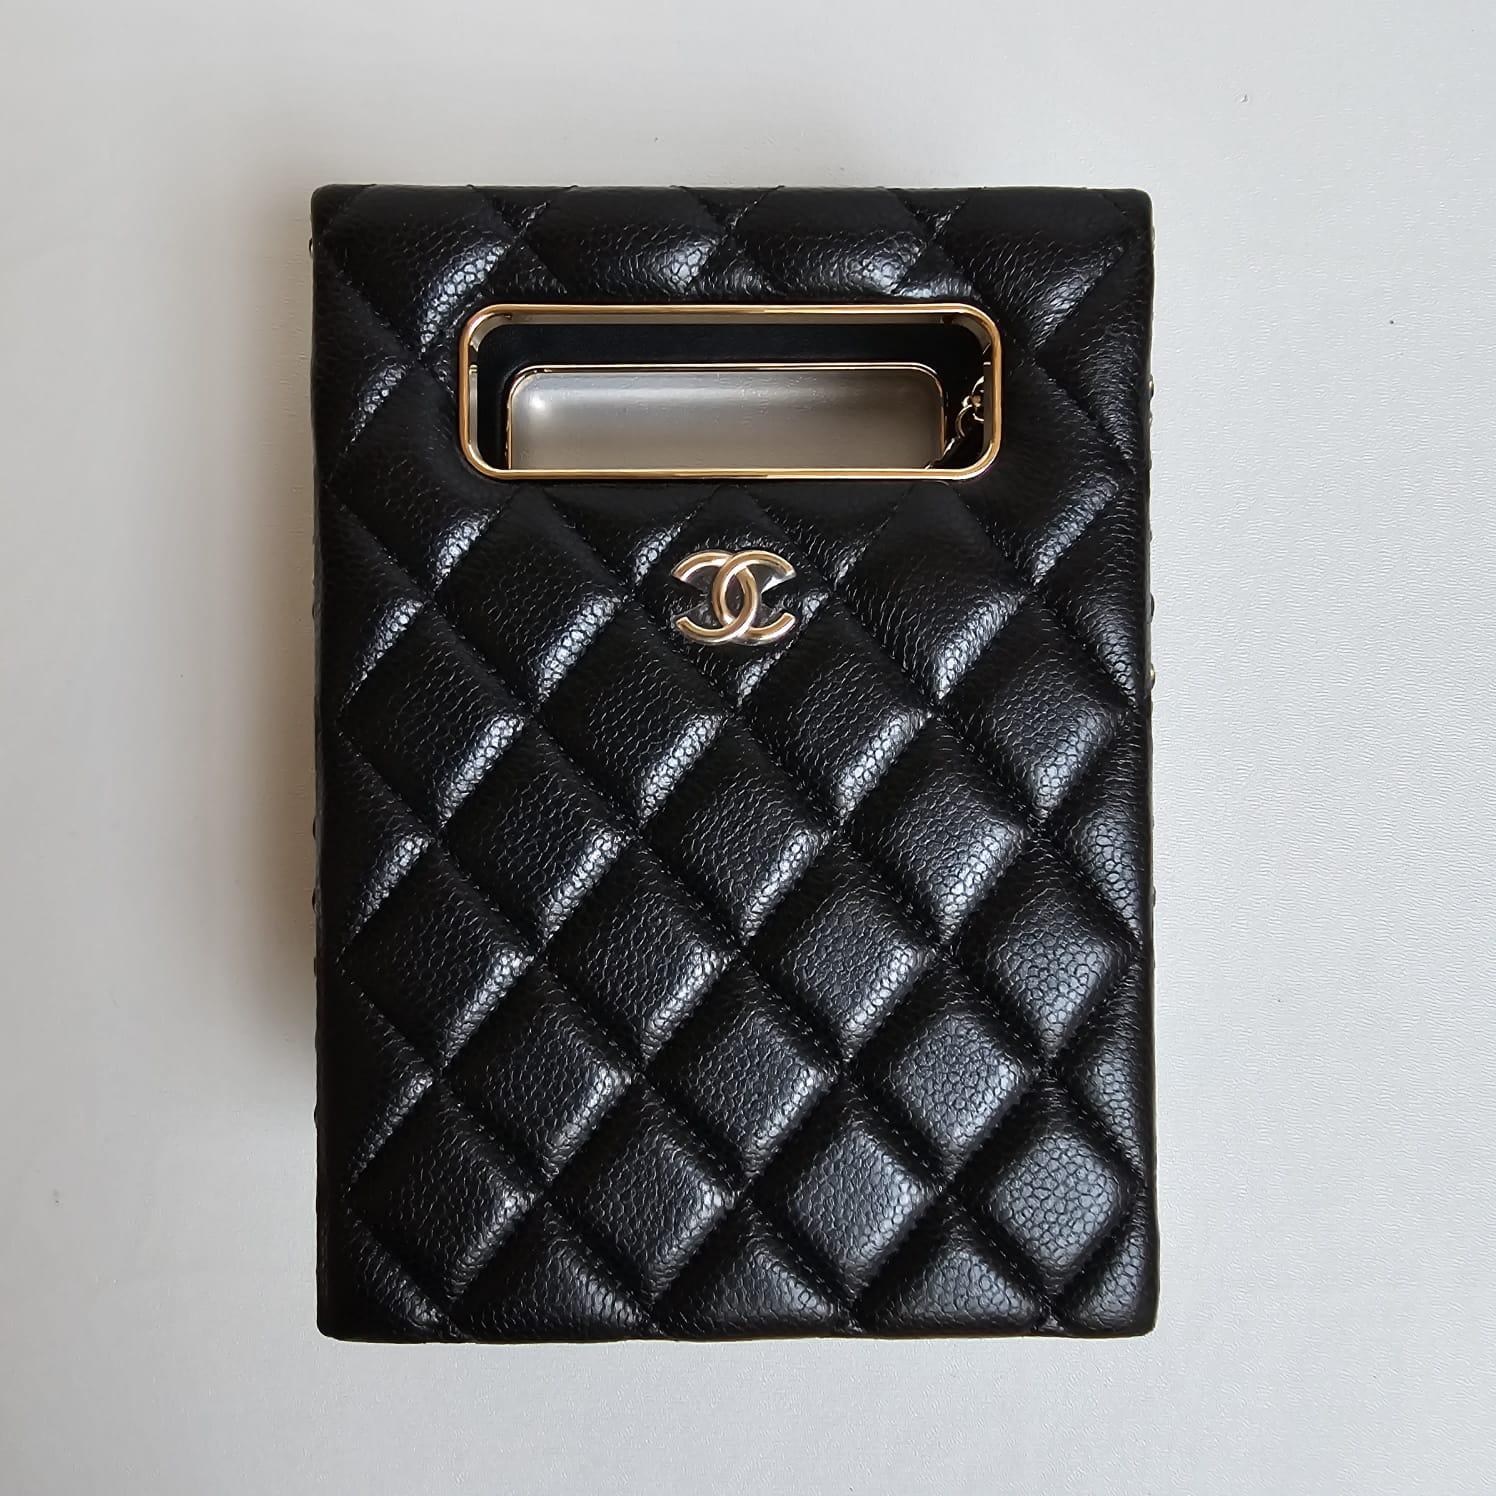 Chanel Black Caviar Quilted Evening Box Bag In Excellent Condition For Sale In Jakarta, Daerah Khusus Ibukota Jakarta